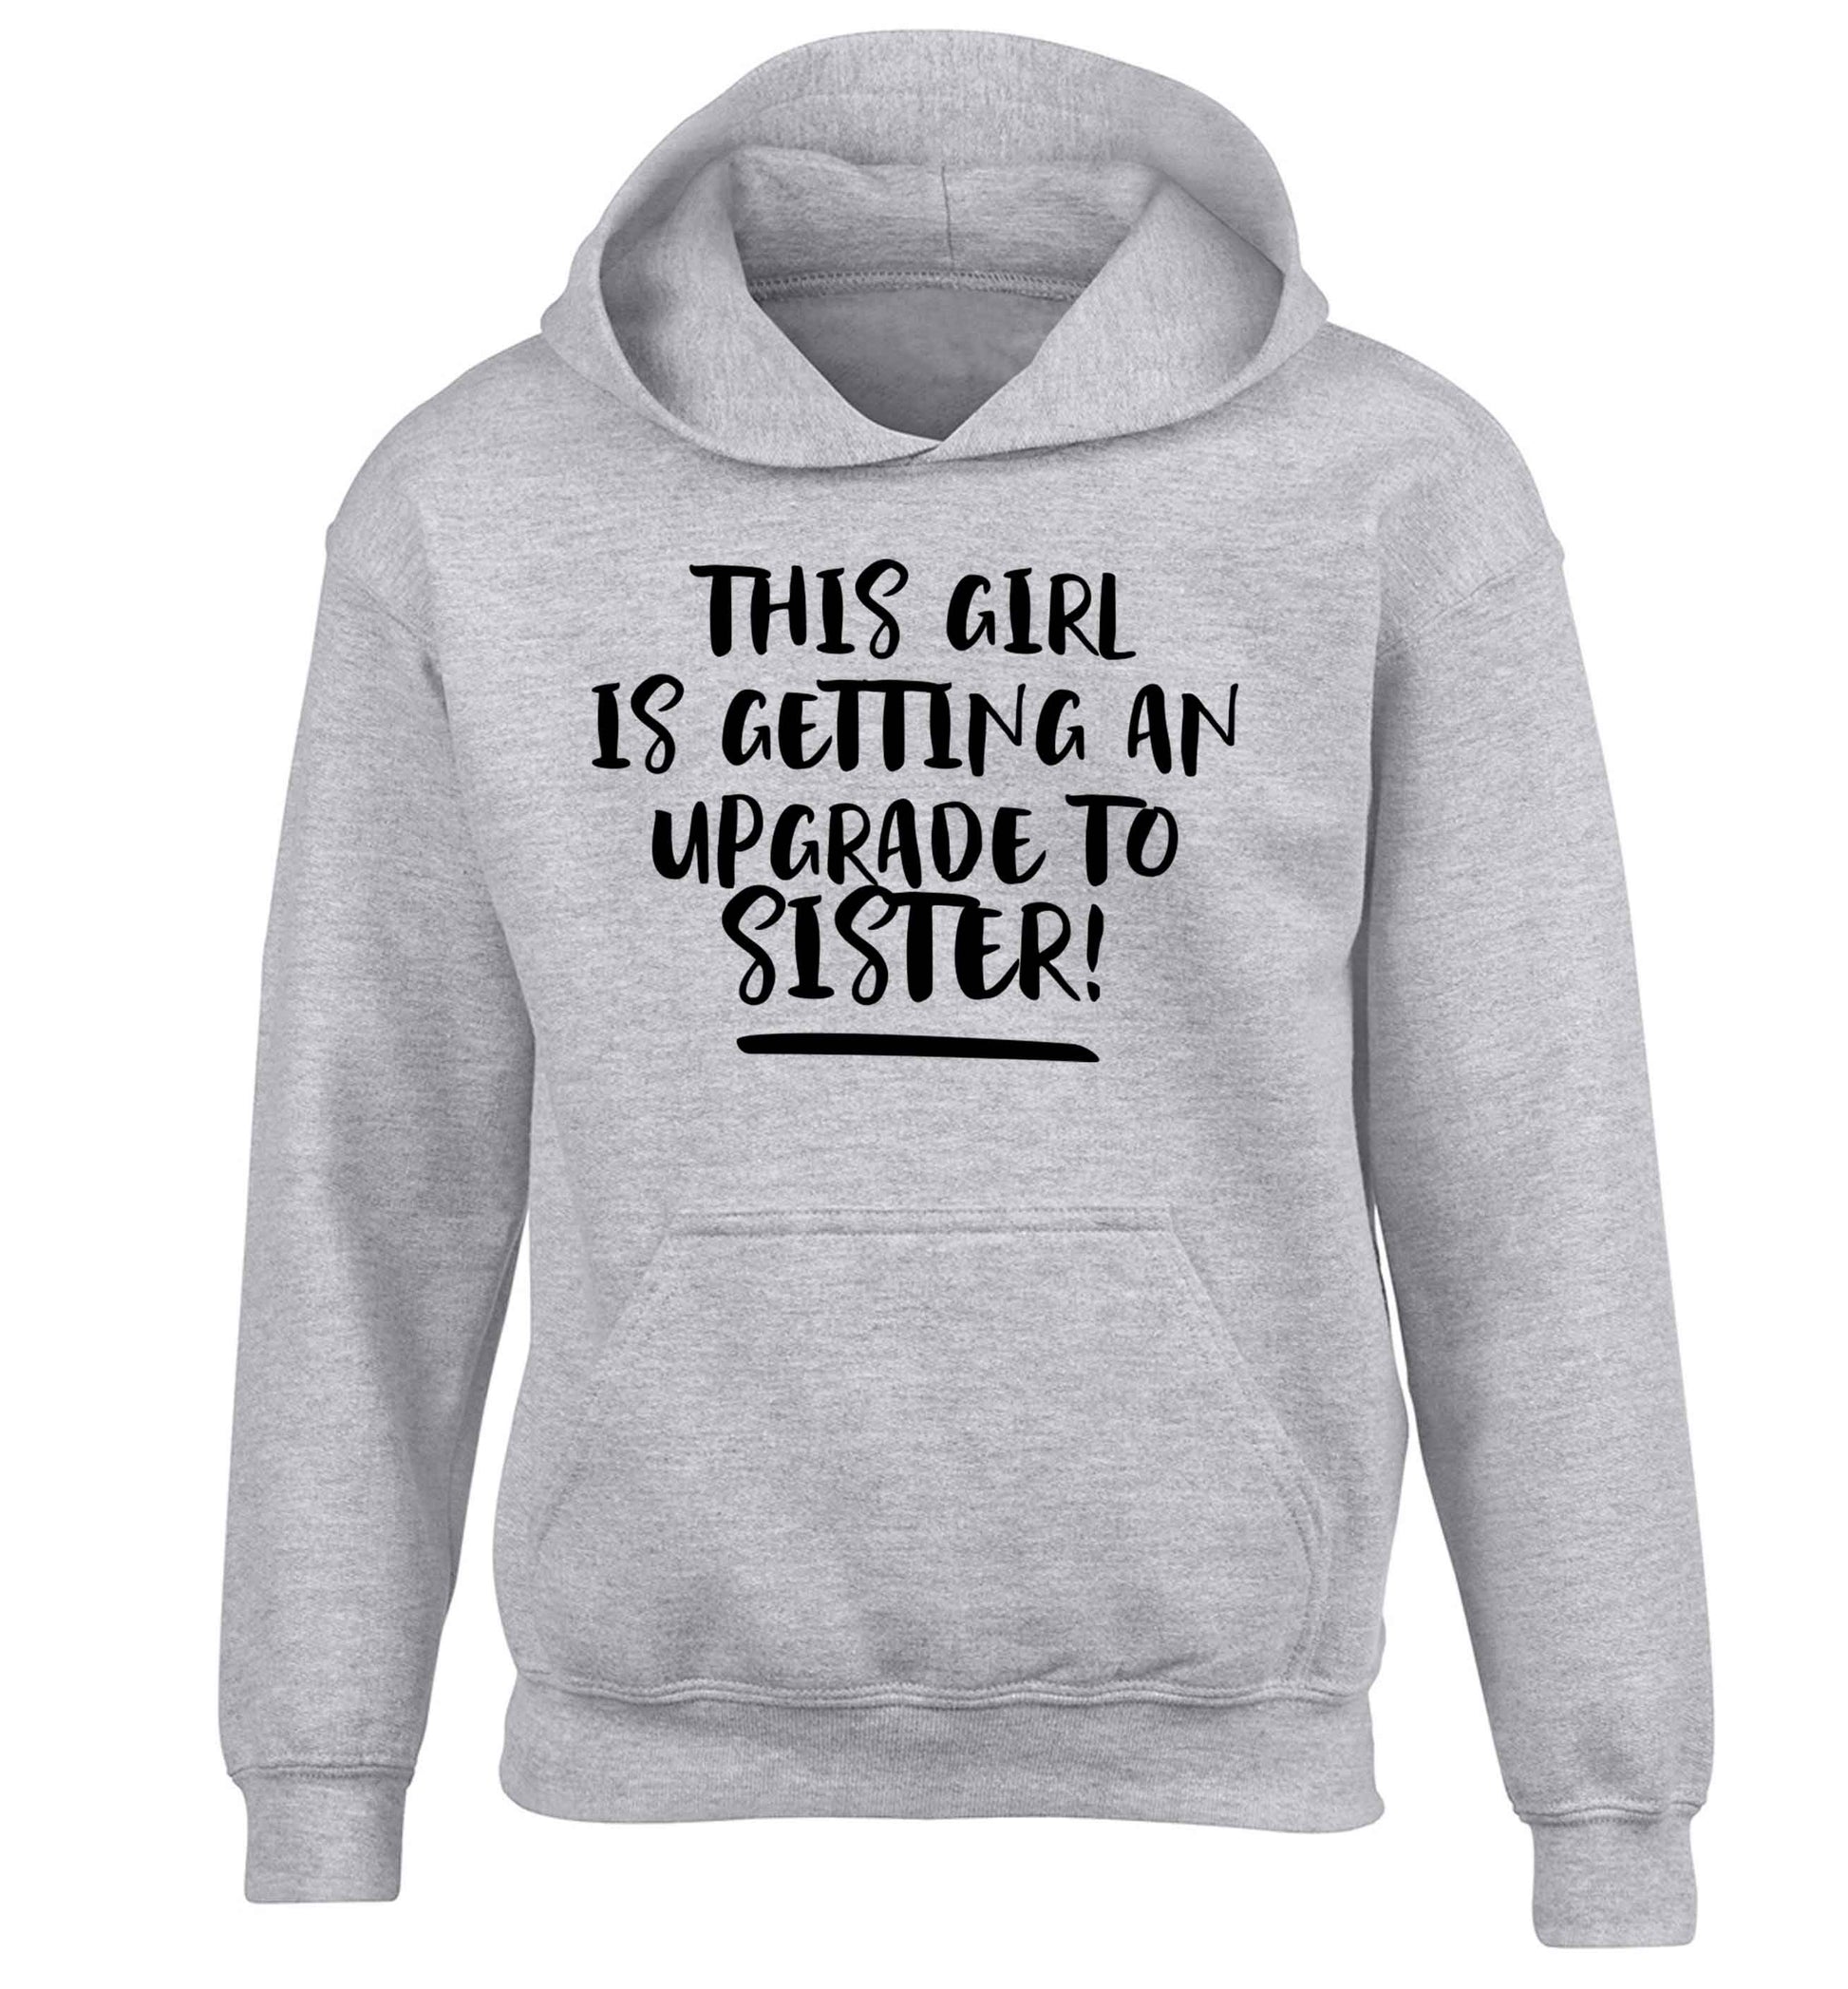 This girl is getting an upgrade to sister! children's grey hoodie 12-13 Years